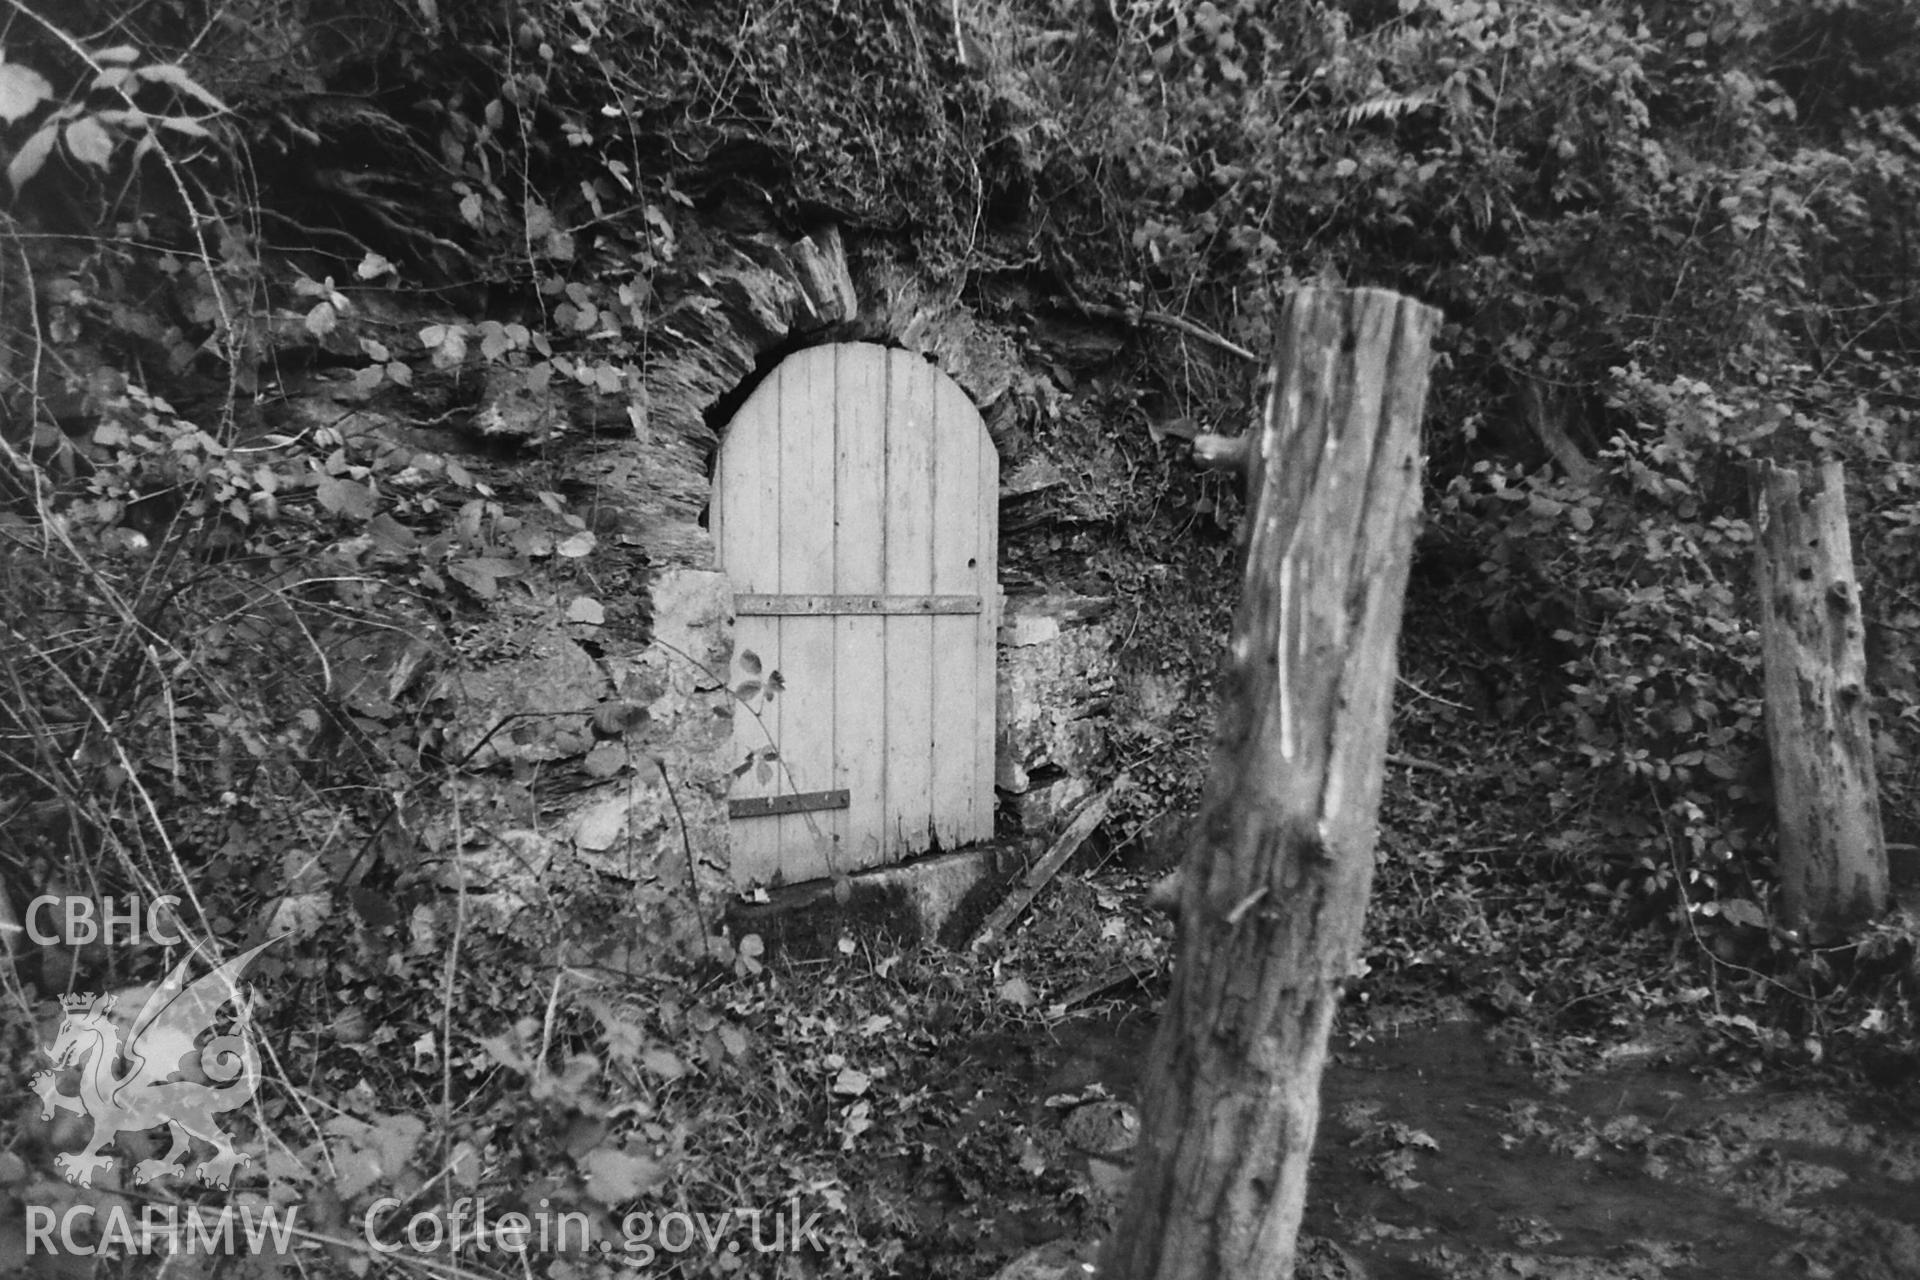 Black and white photo showing lead mine on Merlin's Hill, Abergwili (SN459217), taken by Paul R. Davis, undated.